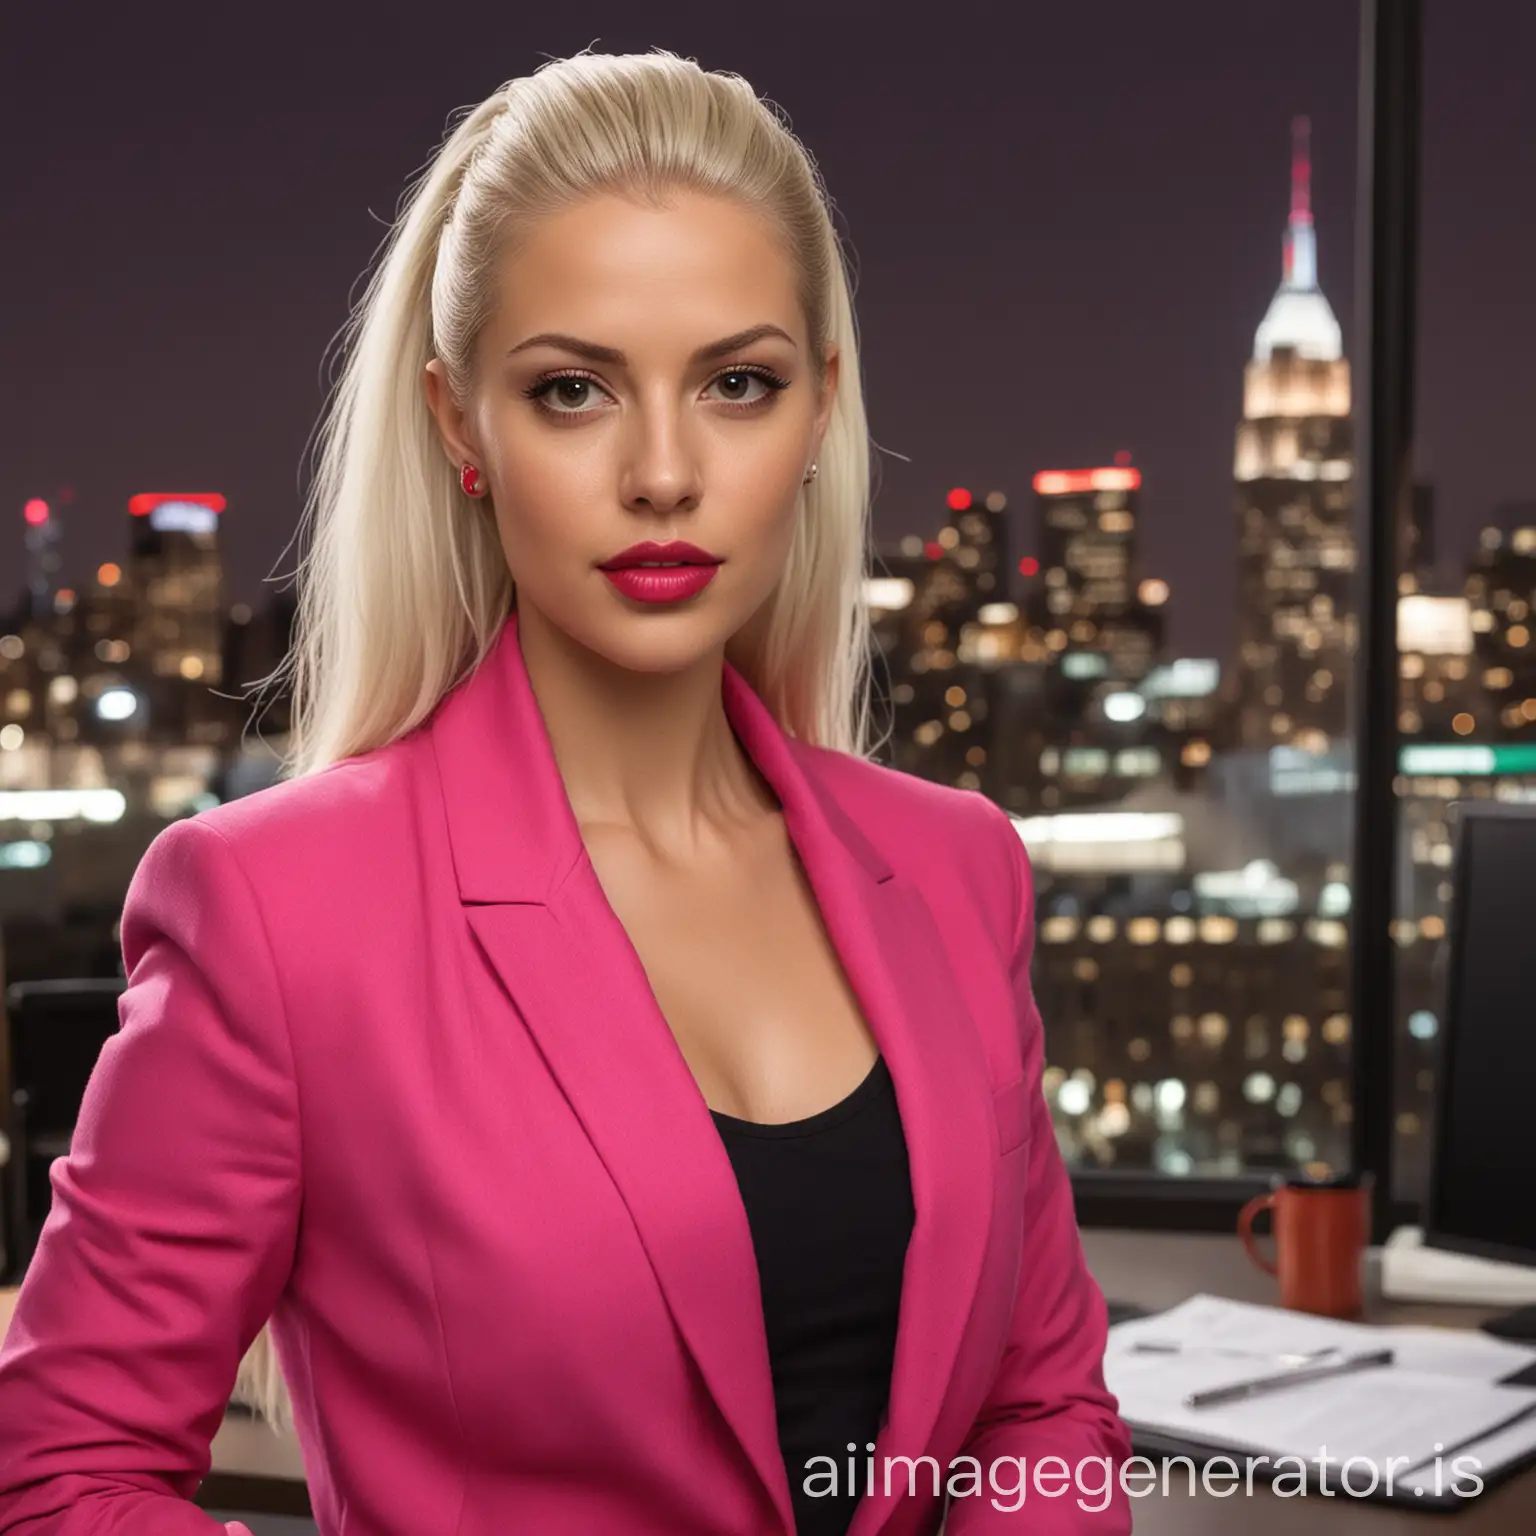 beautiful 30 year old white woman with long, bleach-blonde hair in a slicked-back ponytail, brown eyes, red lipstick, wearing a hot pink blazer, with a serious expression, in a high rise office at nighttime